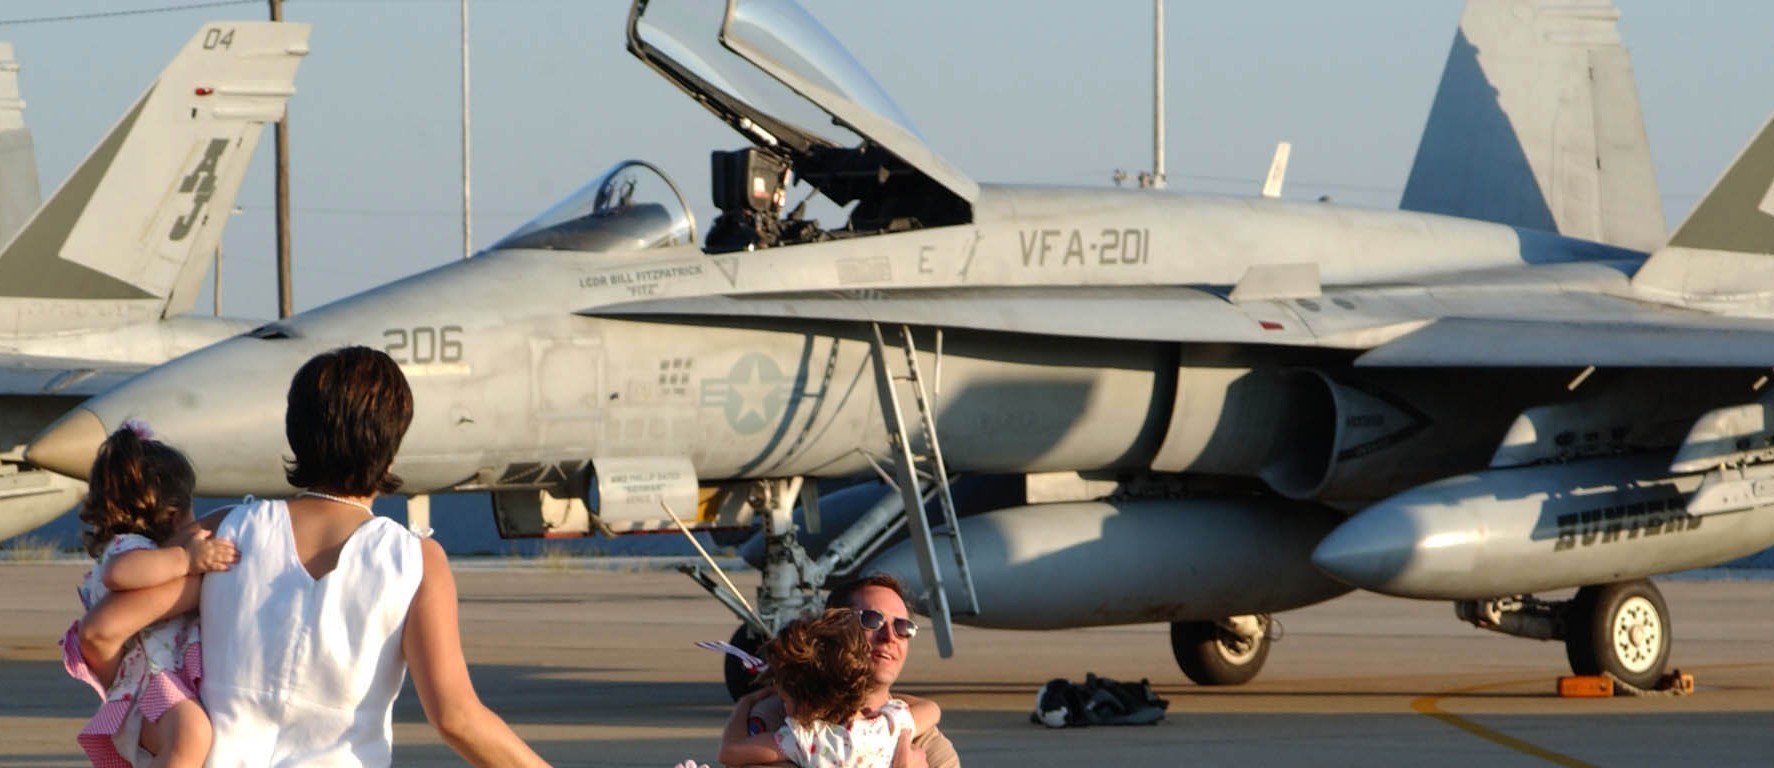 vfa-201 hunters strike fighter squadron us navy reserve f/a-18a hornet 18 nas jrb fort worth texas